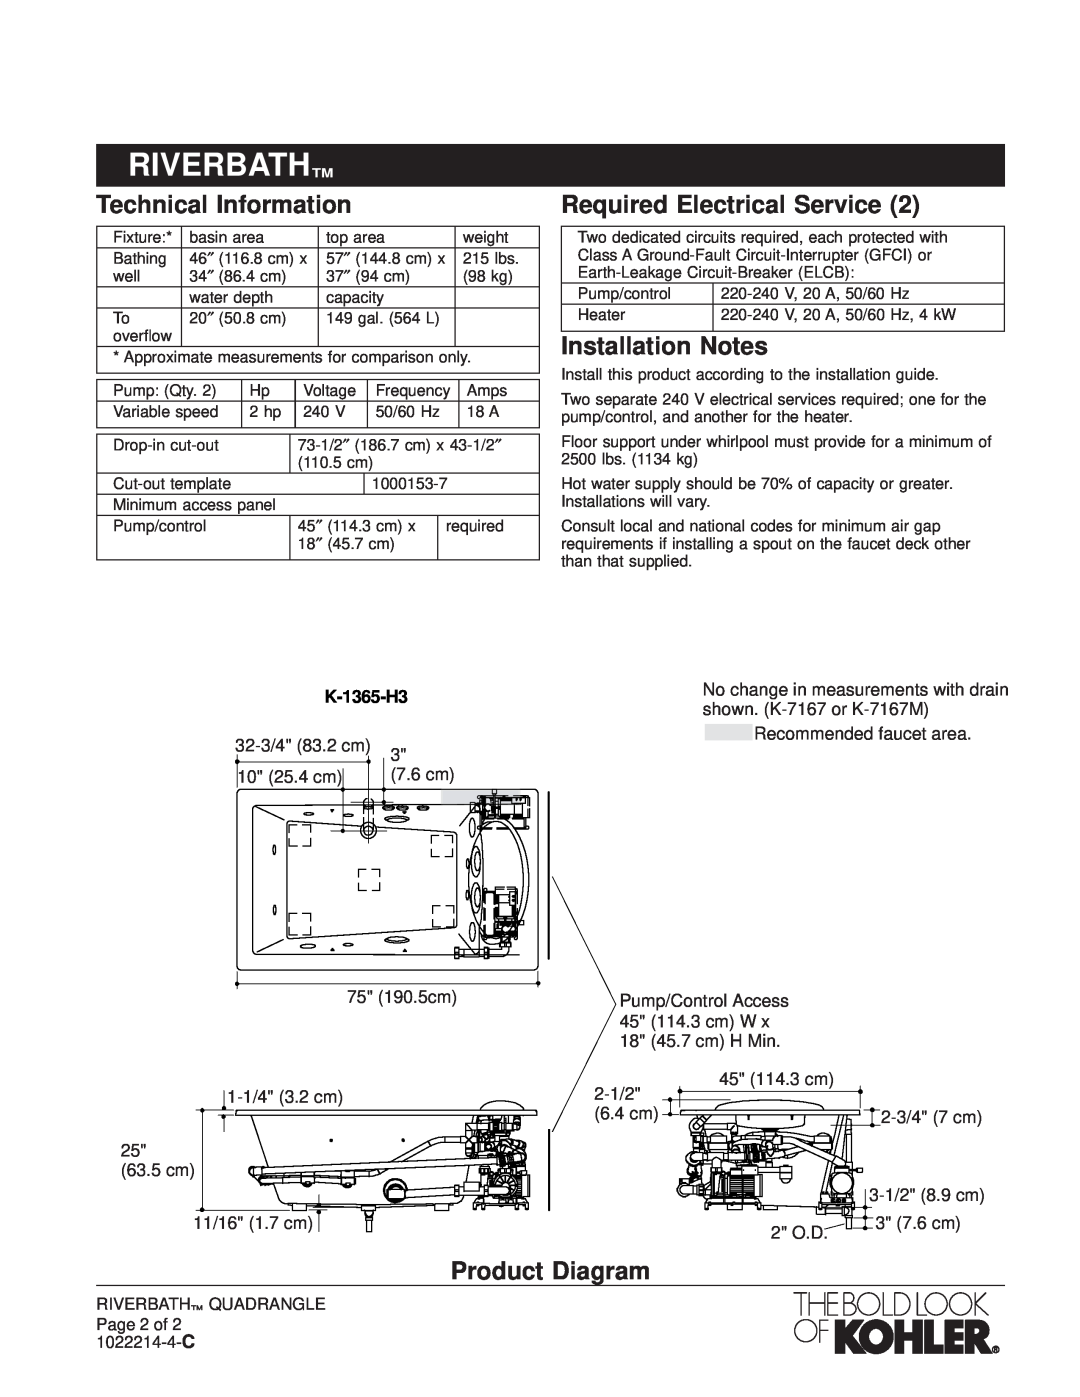 Kohler K-1365-H2 manual Technical Information, Required Electrical Service, Installation Notes, Product Diagram, K-1365-H3 